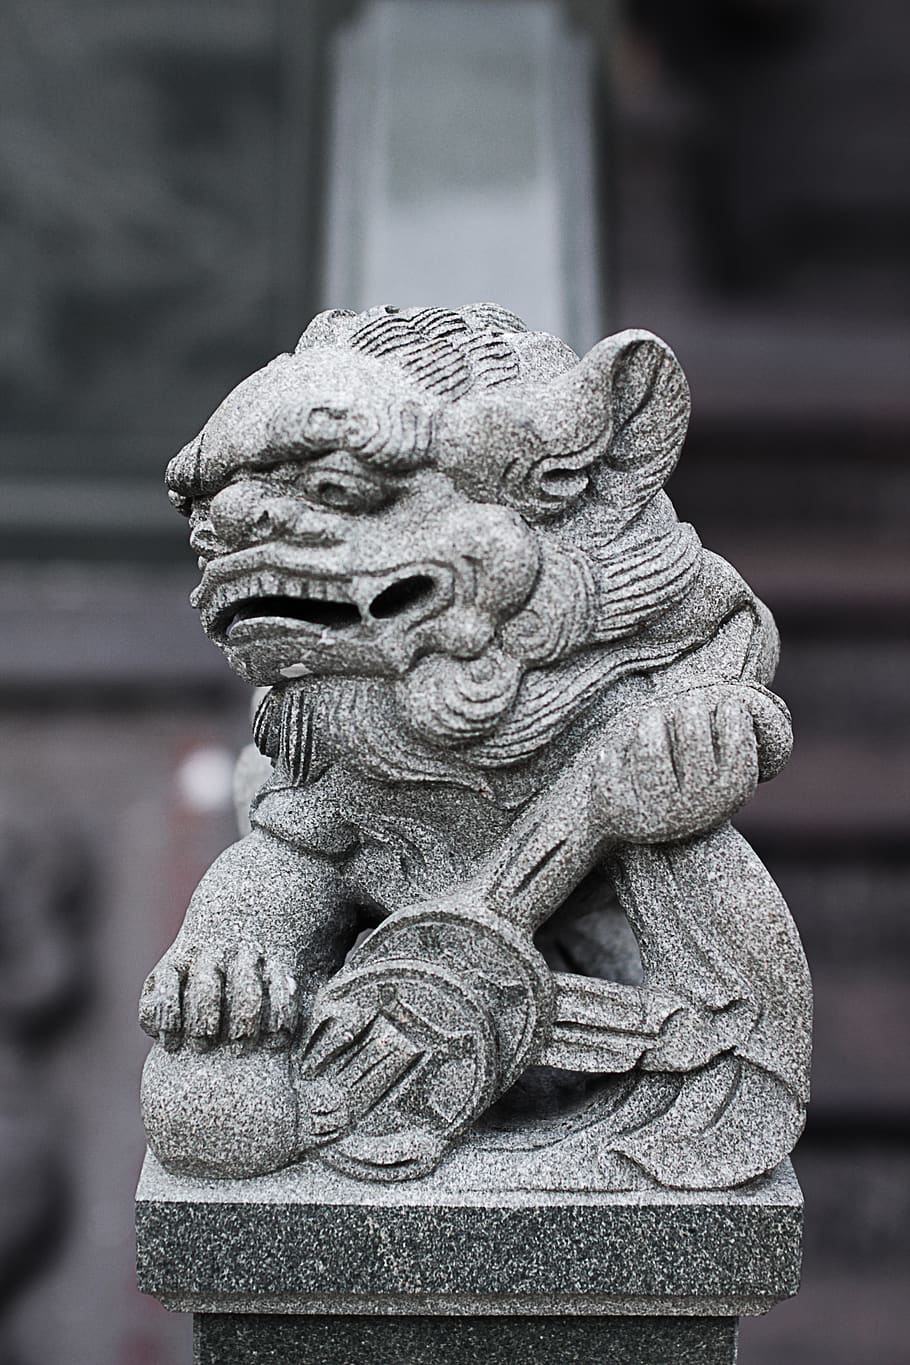 religion, carving, stone lion, buddhism, taiwan, art and craft, sculpture, statue, representation, creativity